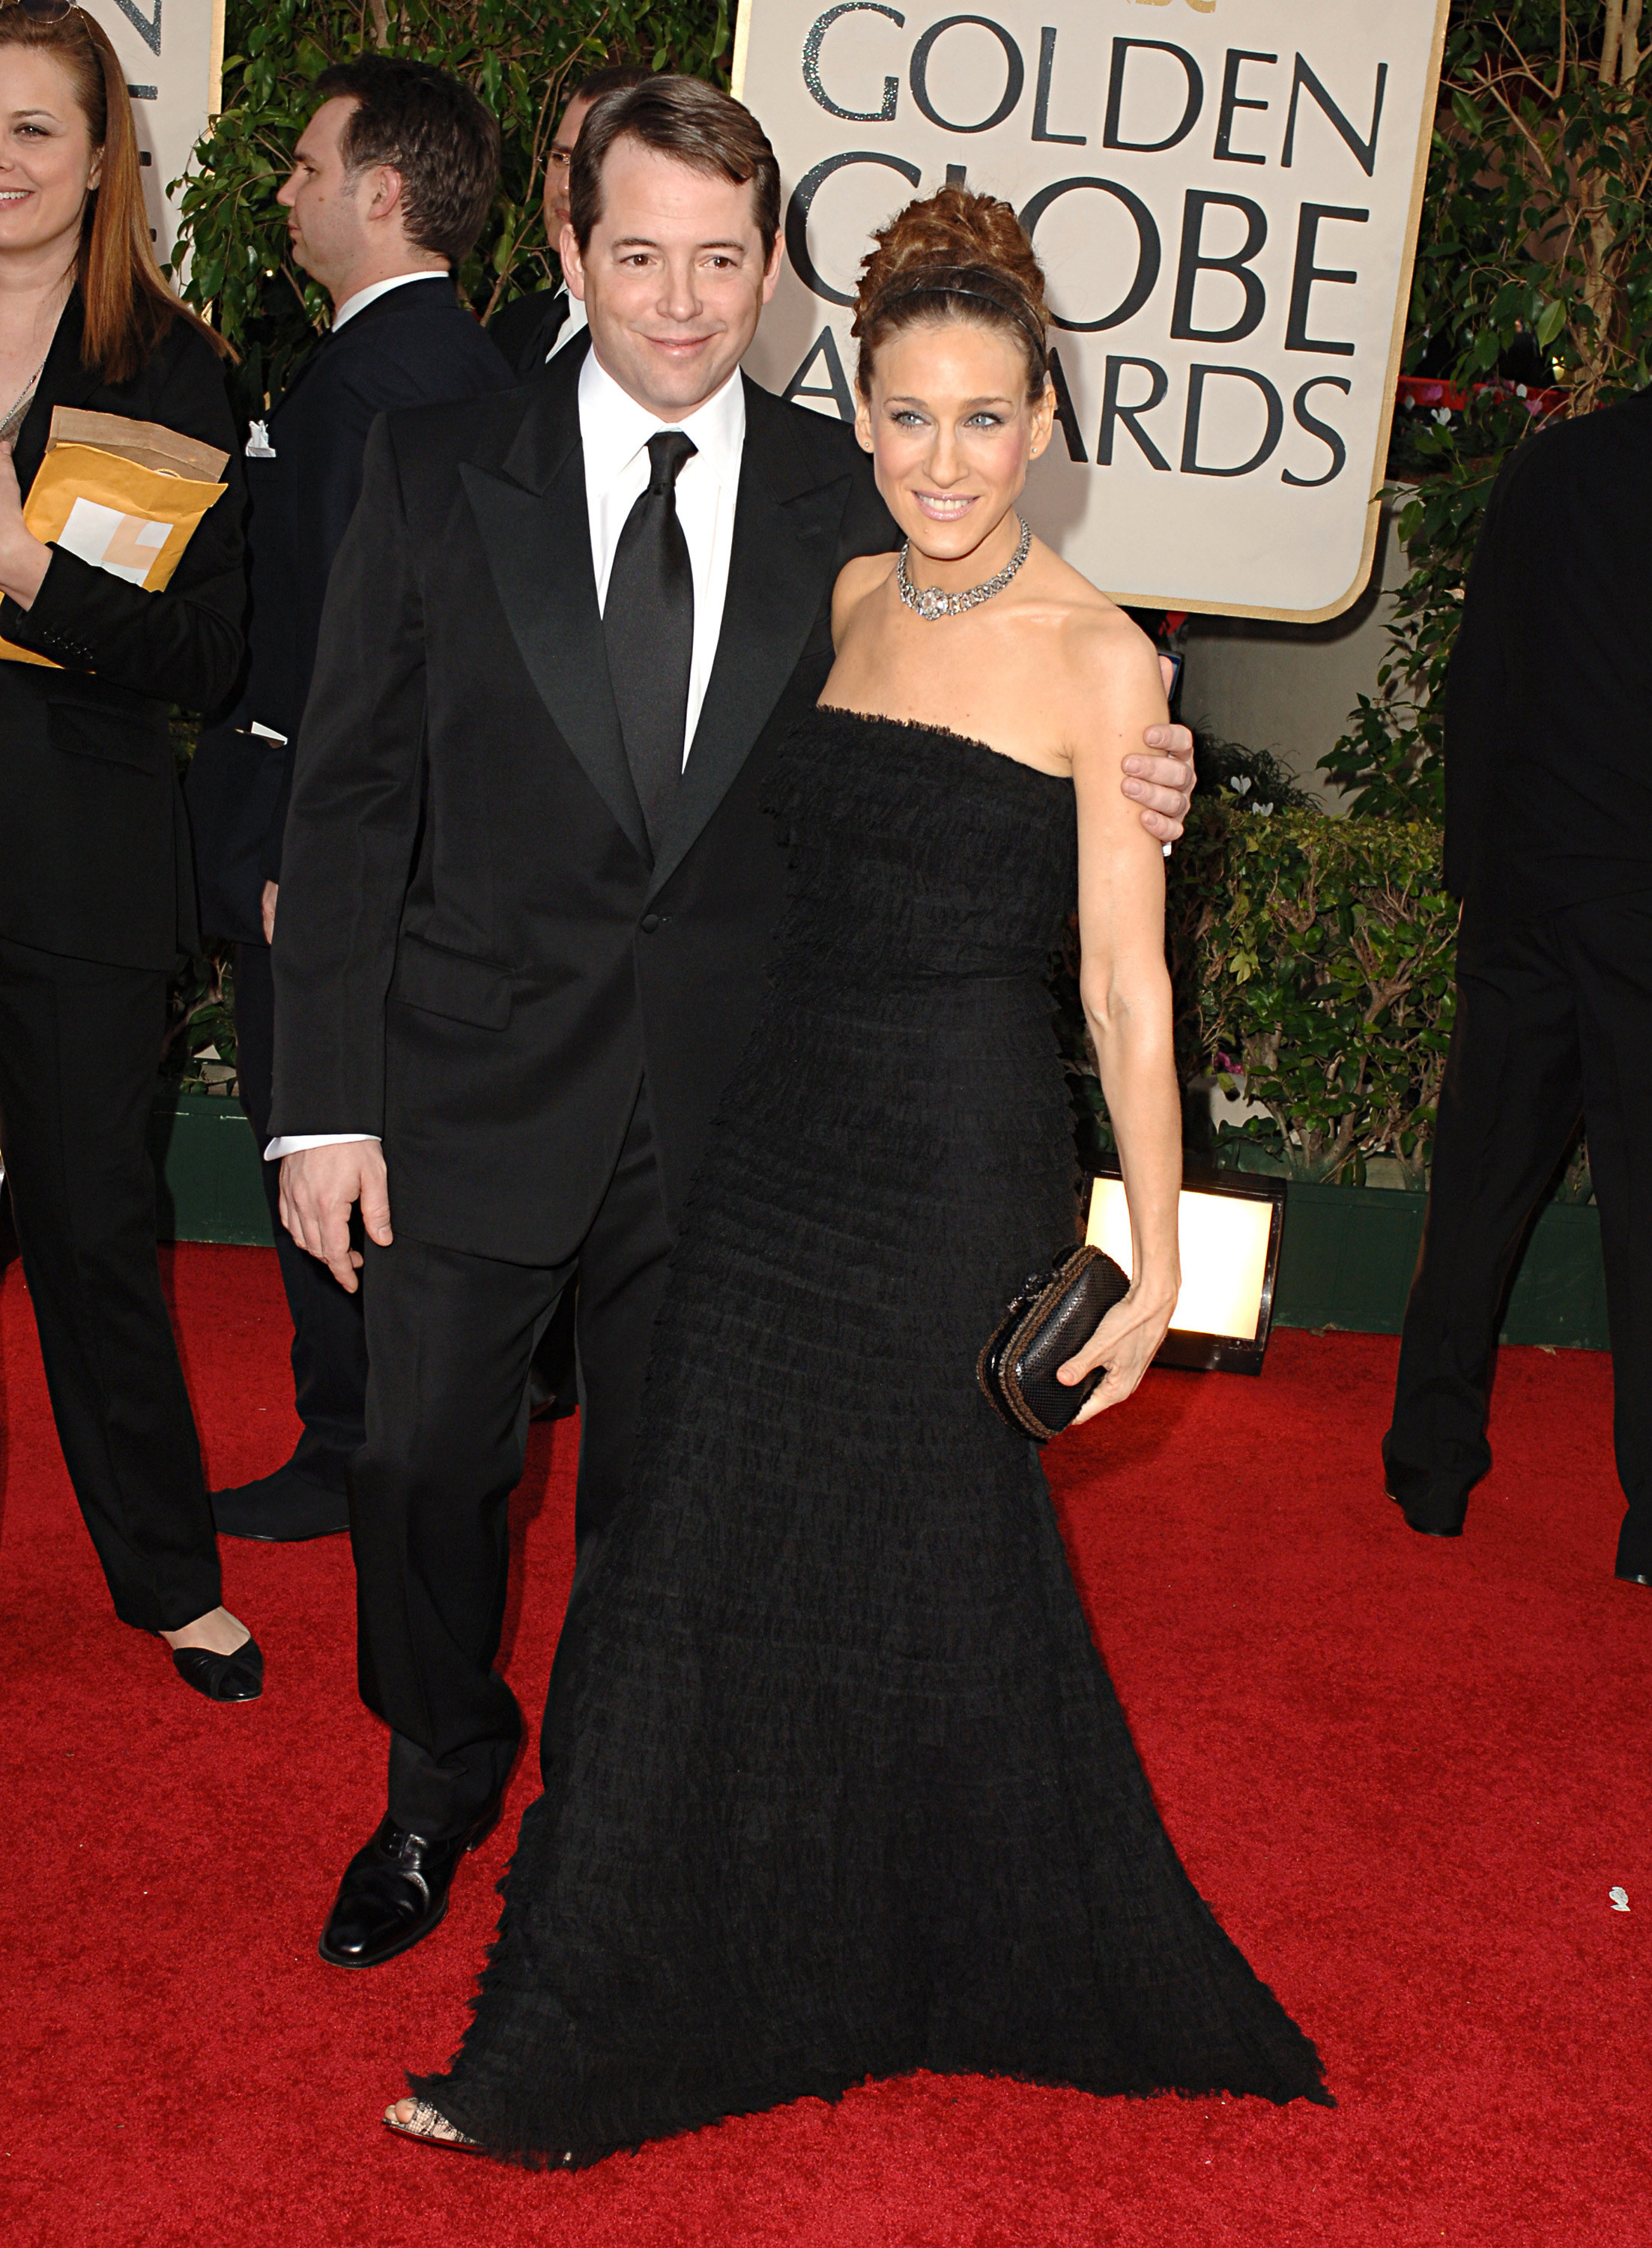 Matthew Broderick and Sarah Jessica Parker pose on the red carpet of the Golden Globes